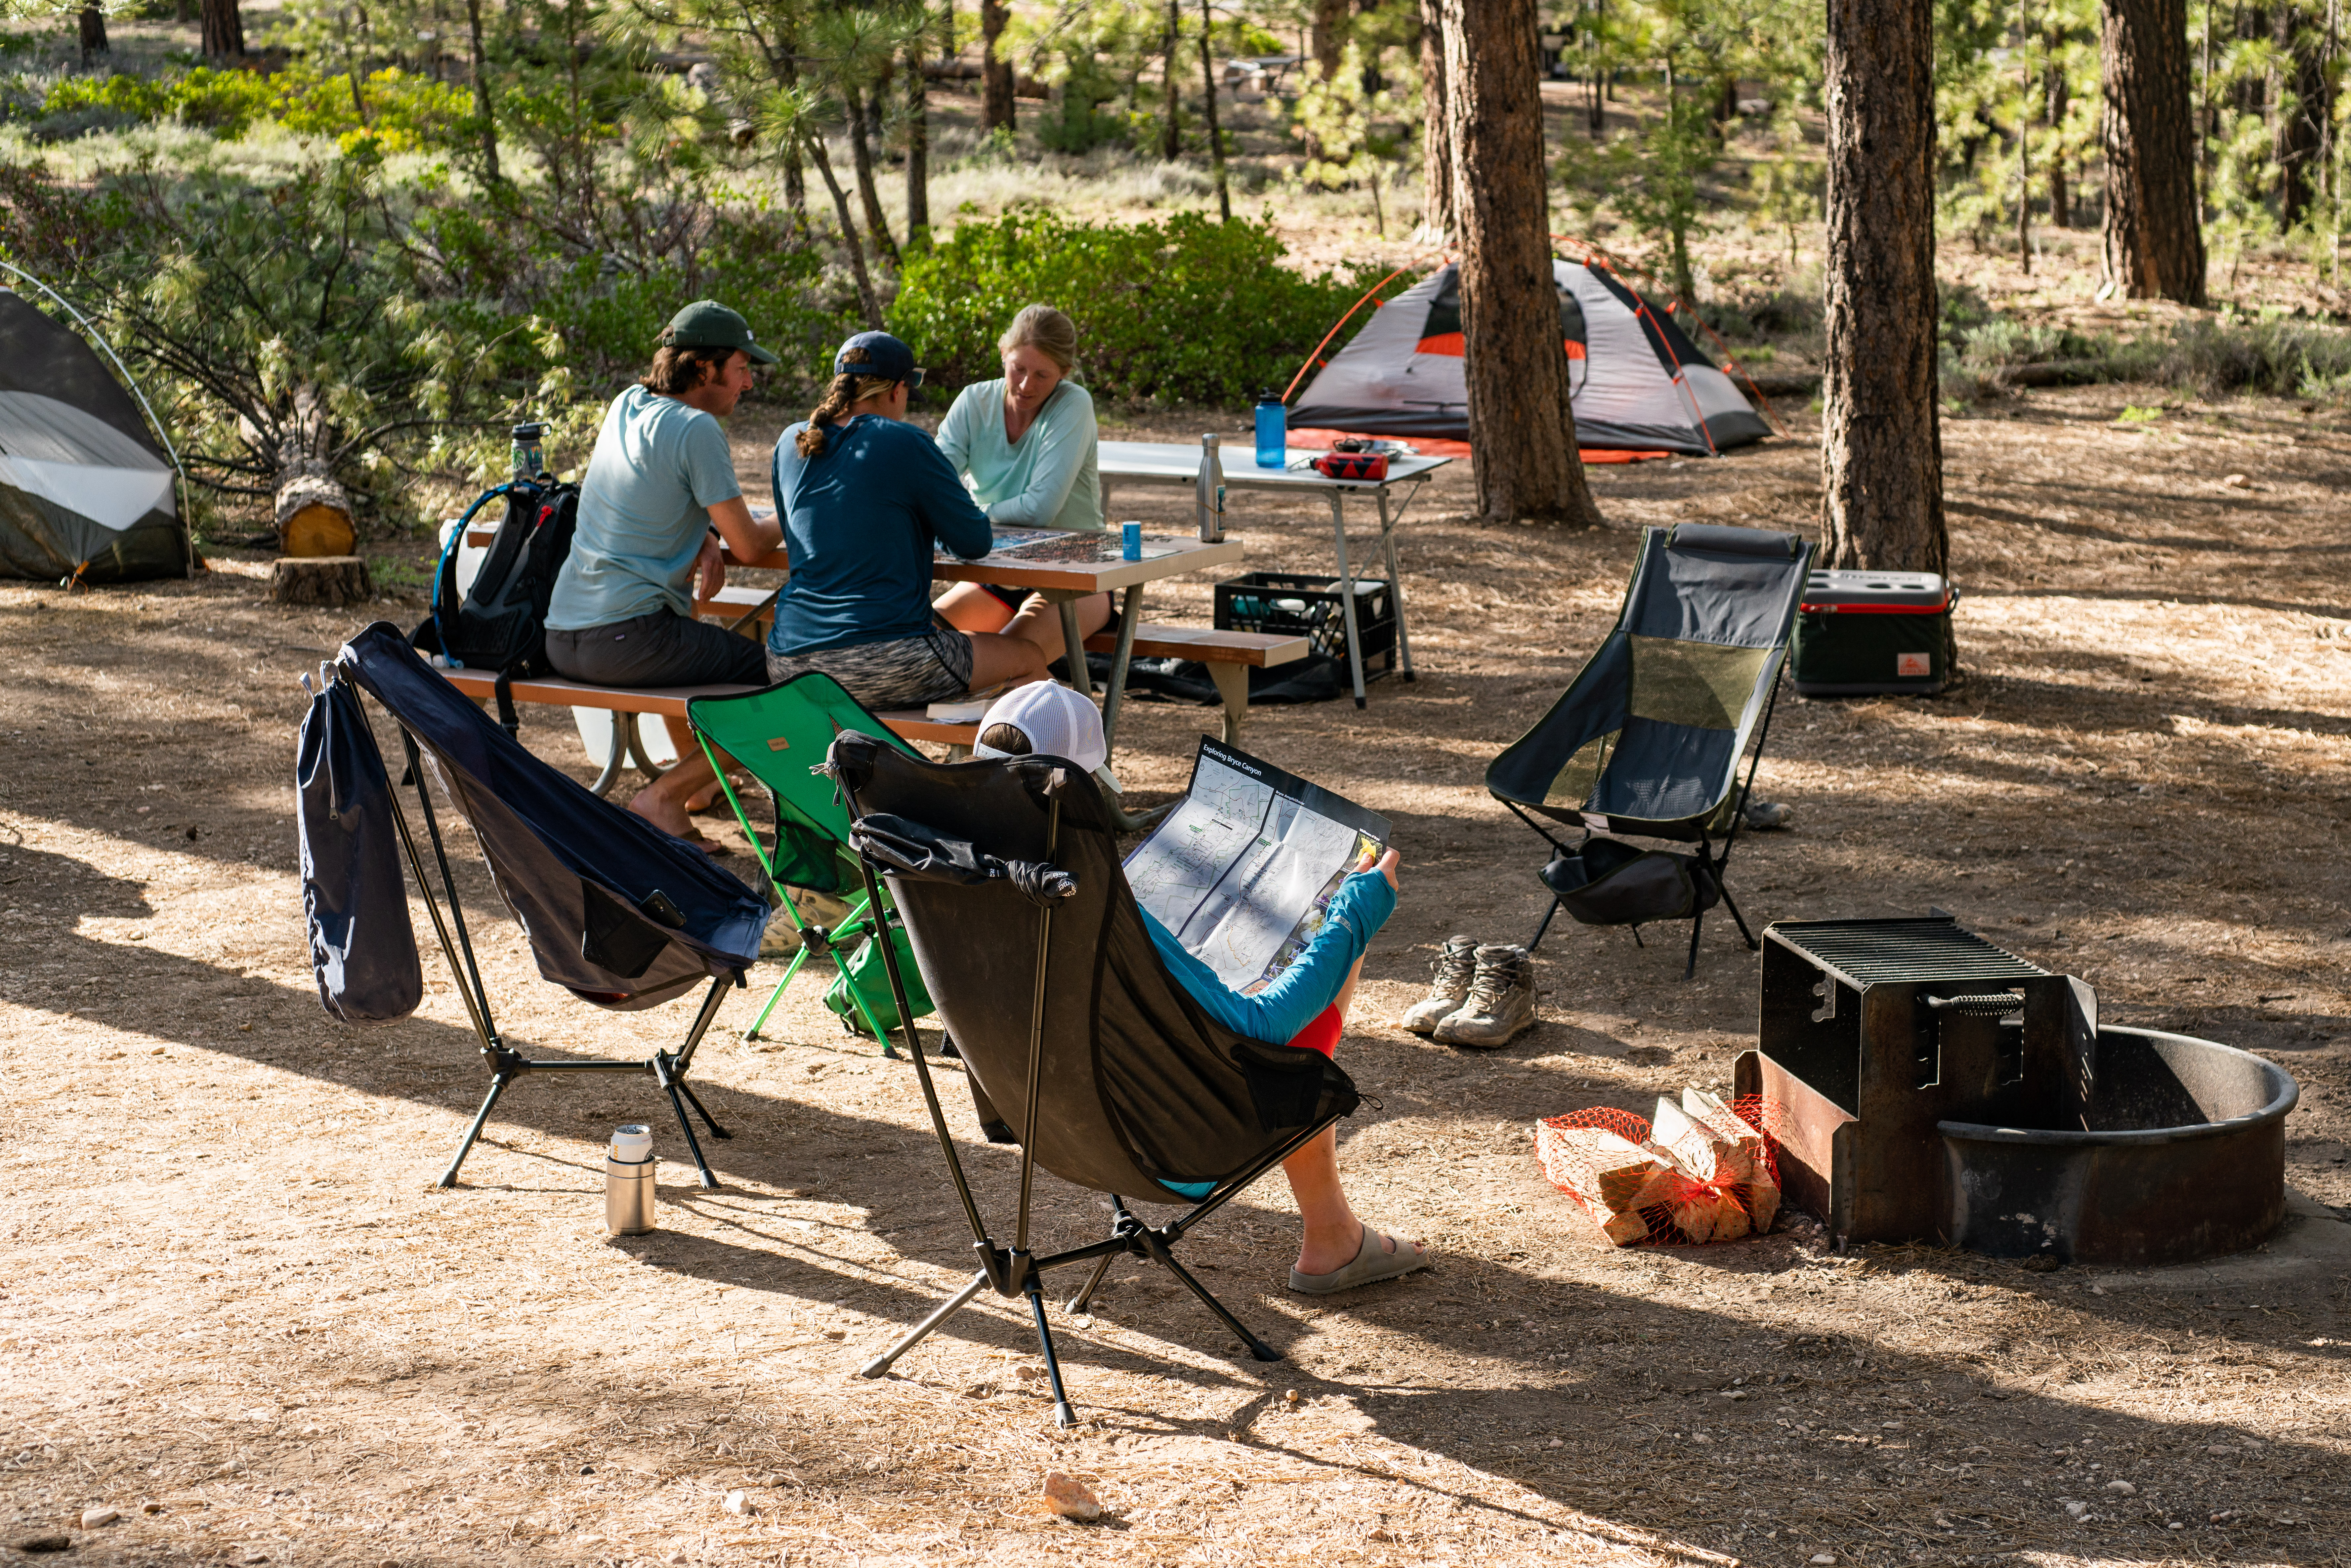 A group of campers relax in a campsite